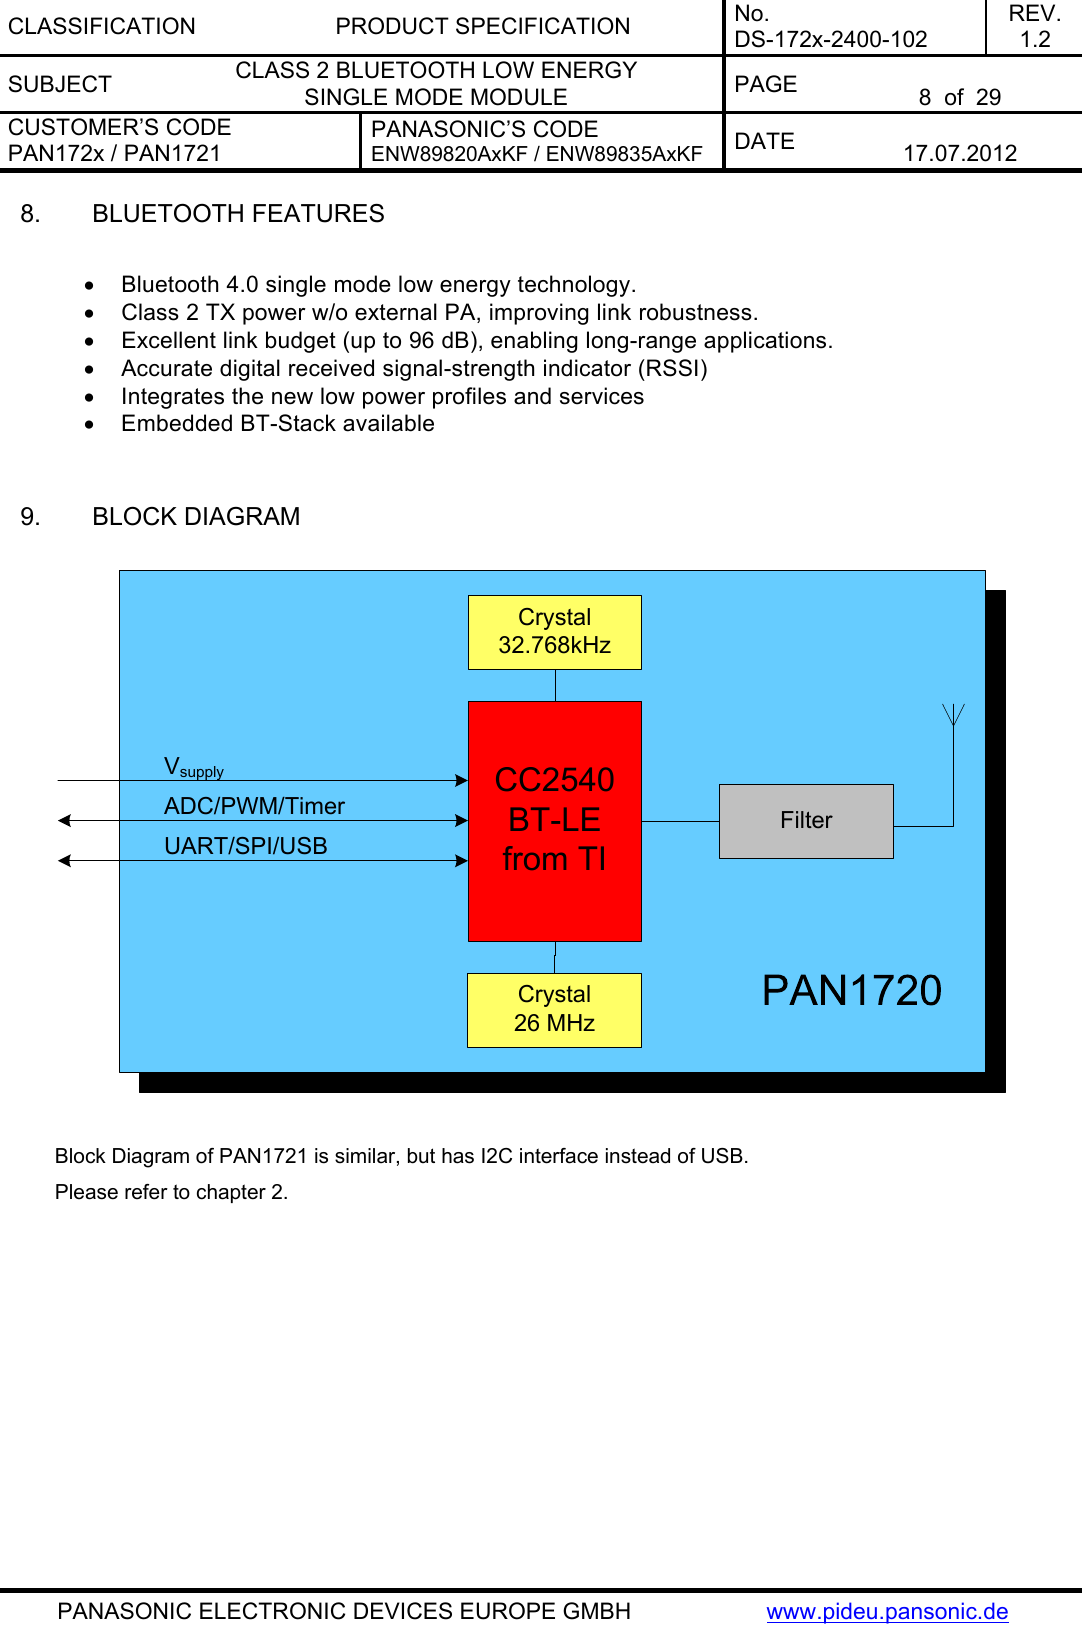 CLASSIFICATION PRODUCT SPECIFICATION No. DS-172x-2400-102 REV. 1.2 SUBJECT  CLASS 2 BLUETOOTH LOW ENERGY  SINGLE MODE MODULE  PAGE   8  of  29 CUSTOMER’S CODE PAN172x / PAN1721 PANASONIC’S CODE ENW89820AxKF / ENW89835AxKF  DATE   17.07.2012   PANASONIC ELECTRONIC DEVICES EUROPE GMBH  www.pideu.pansonic.de 8.  BLUETOOTH FEATURES  •  Bluetooth 4.0 single mode low energy technology. •  Class 2 TX power w/o external PA, improving link robustness. •  Excellent link budget (up to 96 dB), enabling long-range applications. •  Accurate digital received signal-strength indicator (RSSI) •  Integrates the new low power profiles and services •  Embedded BT-Stack available   9.  BLOCK DIAGRAM  CC2540BT-LEfrom TICrystal32.768kHzCrystal 26 MHzFilterVsupplyADC/PWM/TimerUART/SPI/USB  Block Diagram of PAN1721 is similar, but has I2C interface instead of USB.  Please refer to chapter 2.   